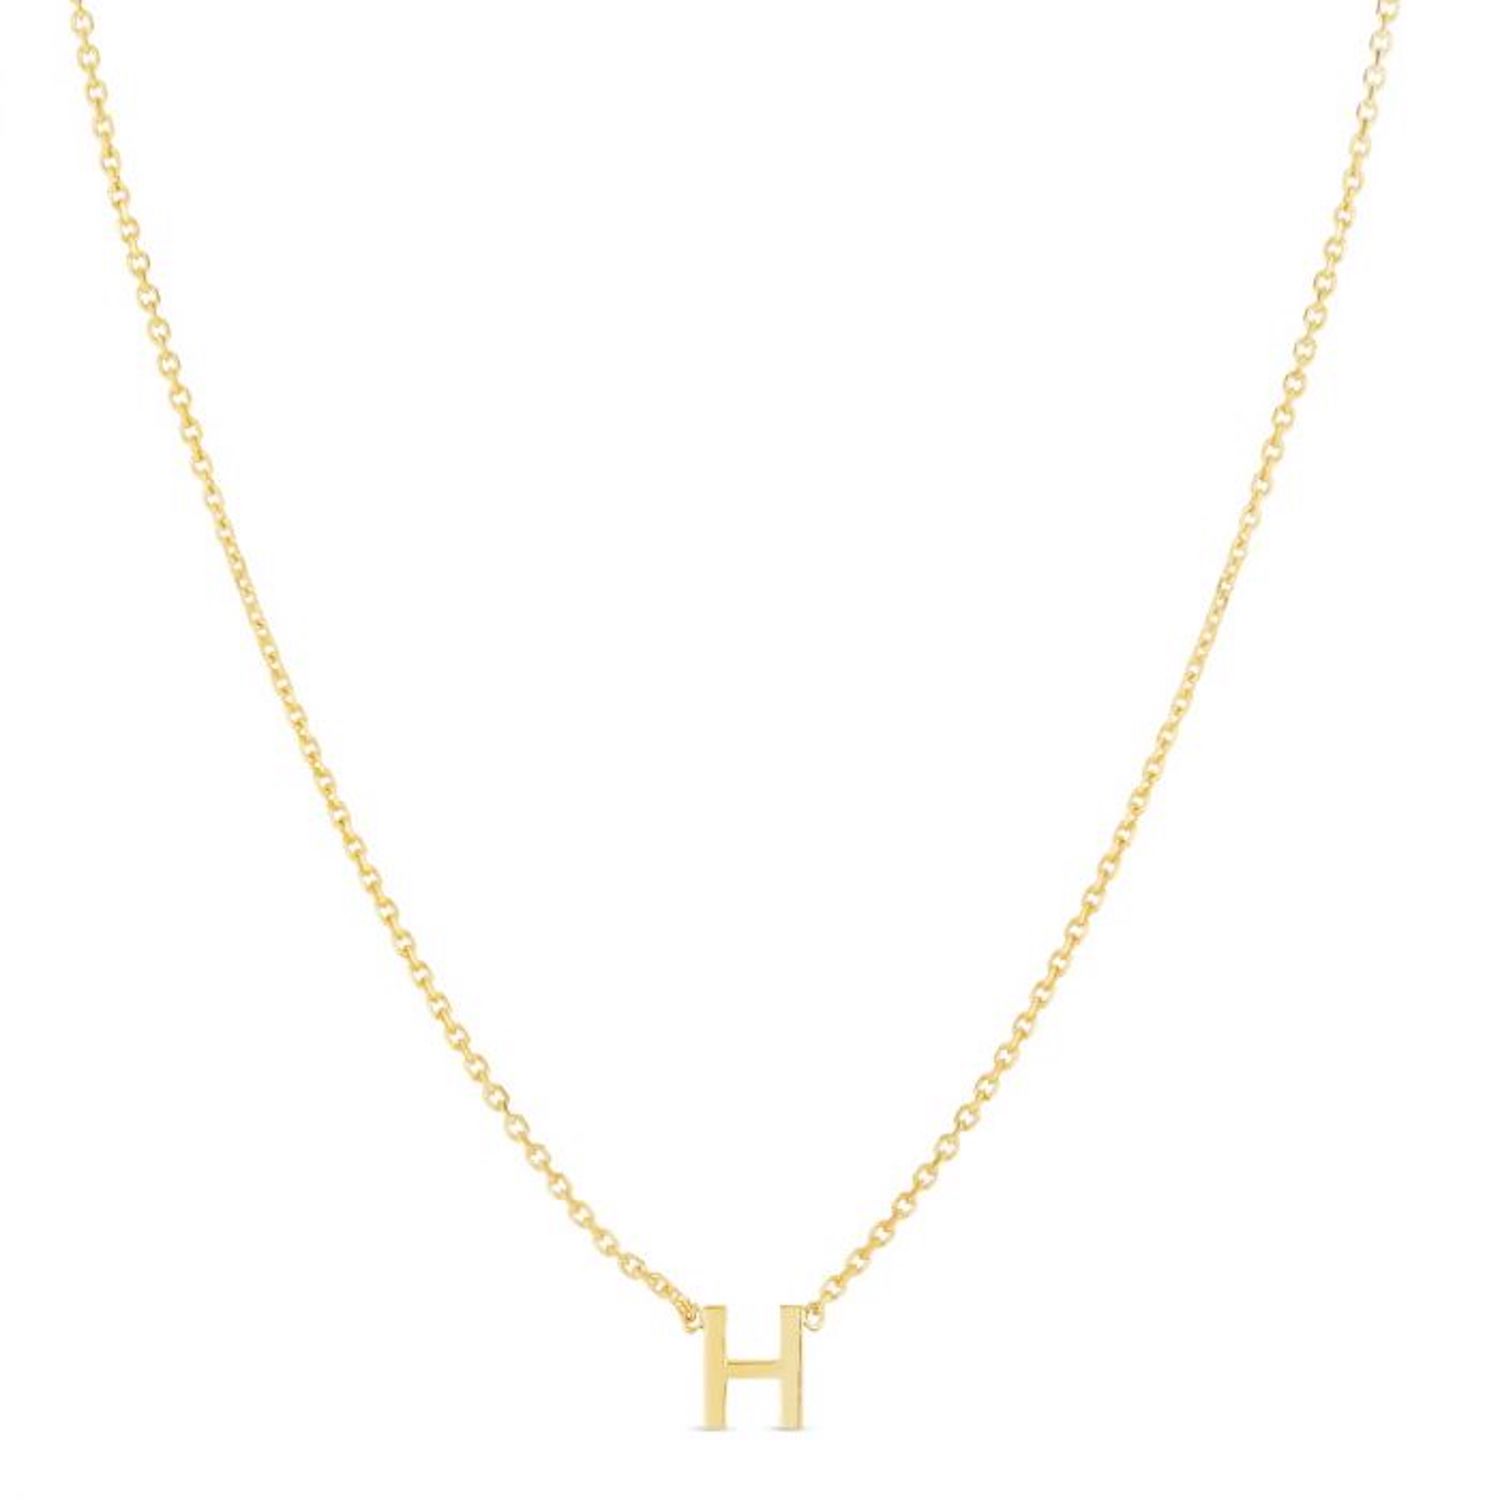 14K Yellow Gold Letter Initials Pendant Necklace 16"-18" - H